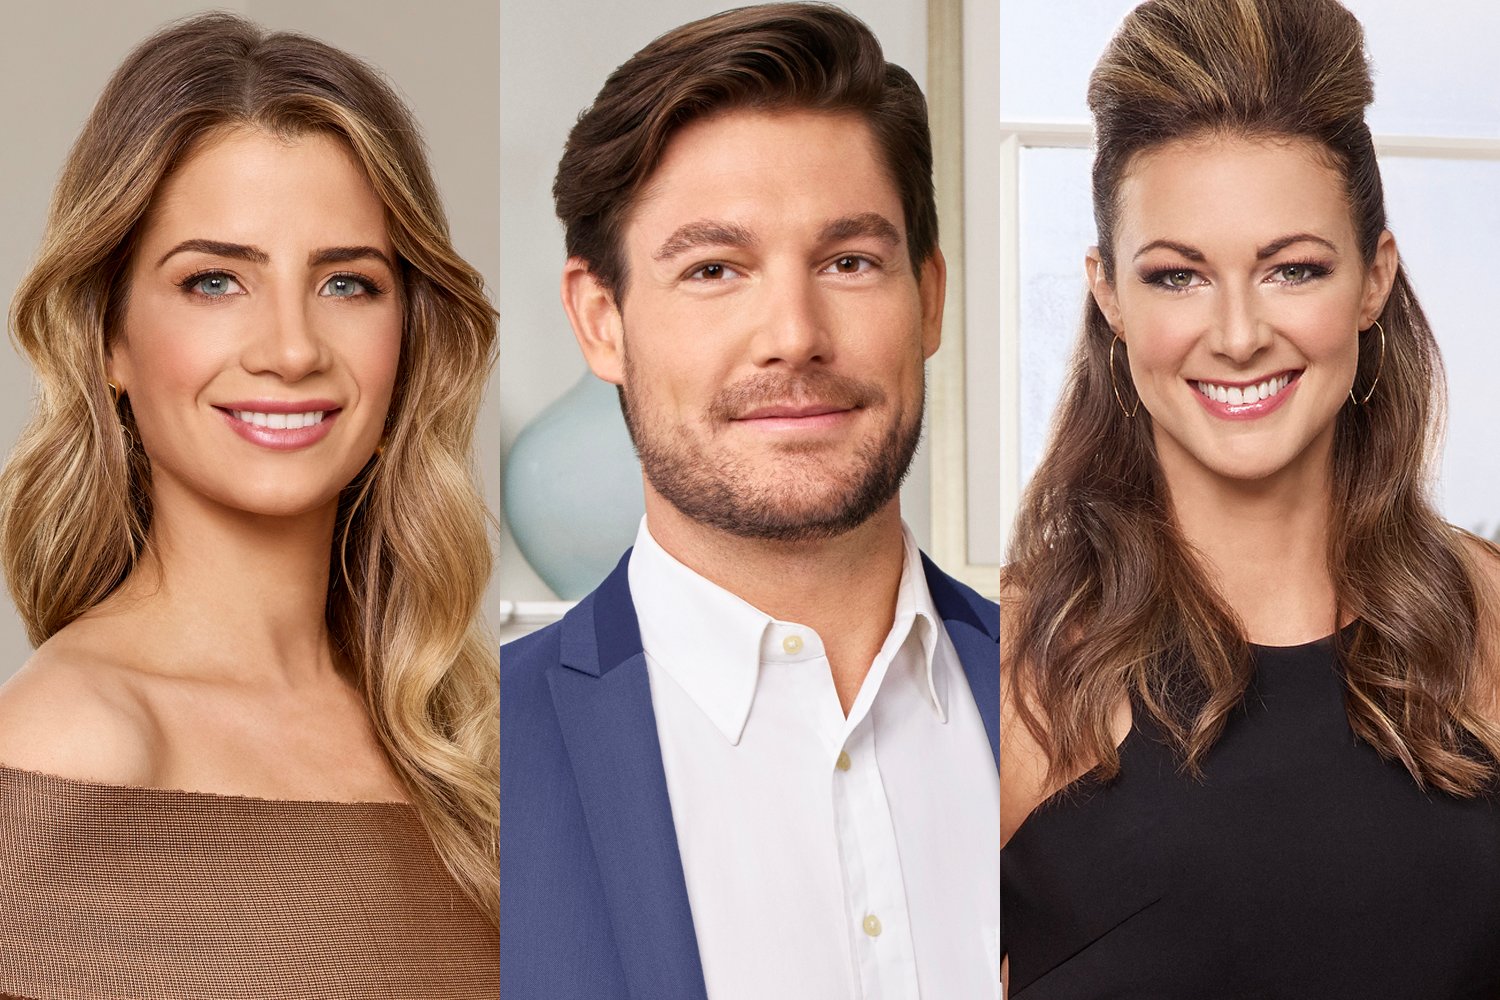 Naomie Olindo, Craig Conover, and Chelsea Meissner